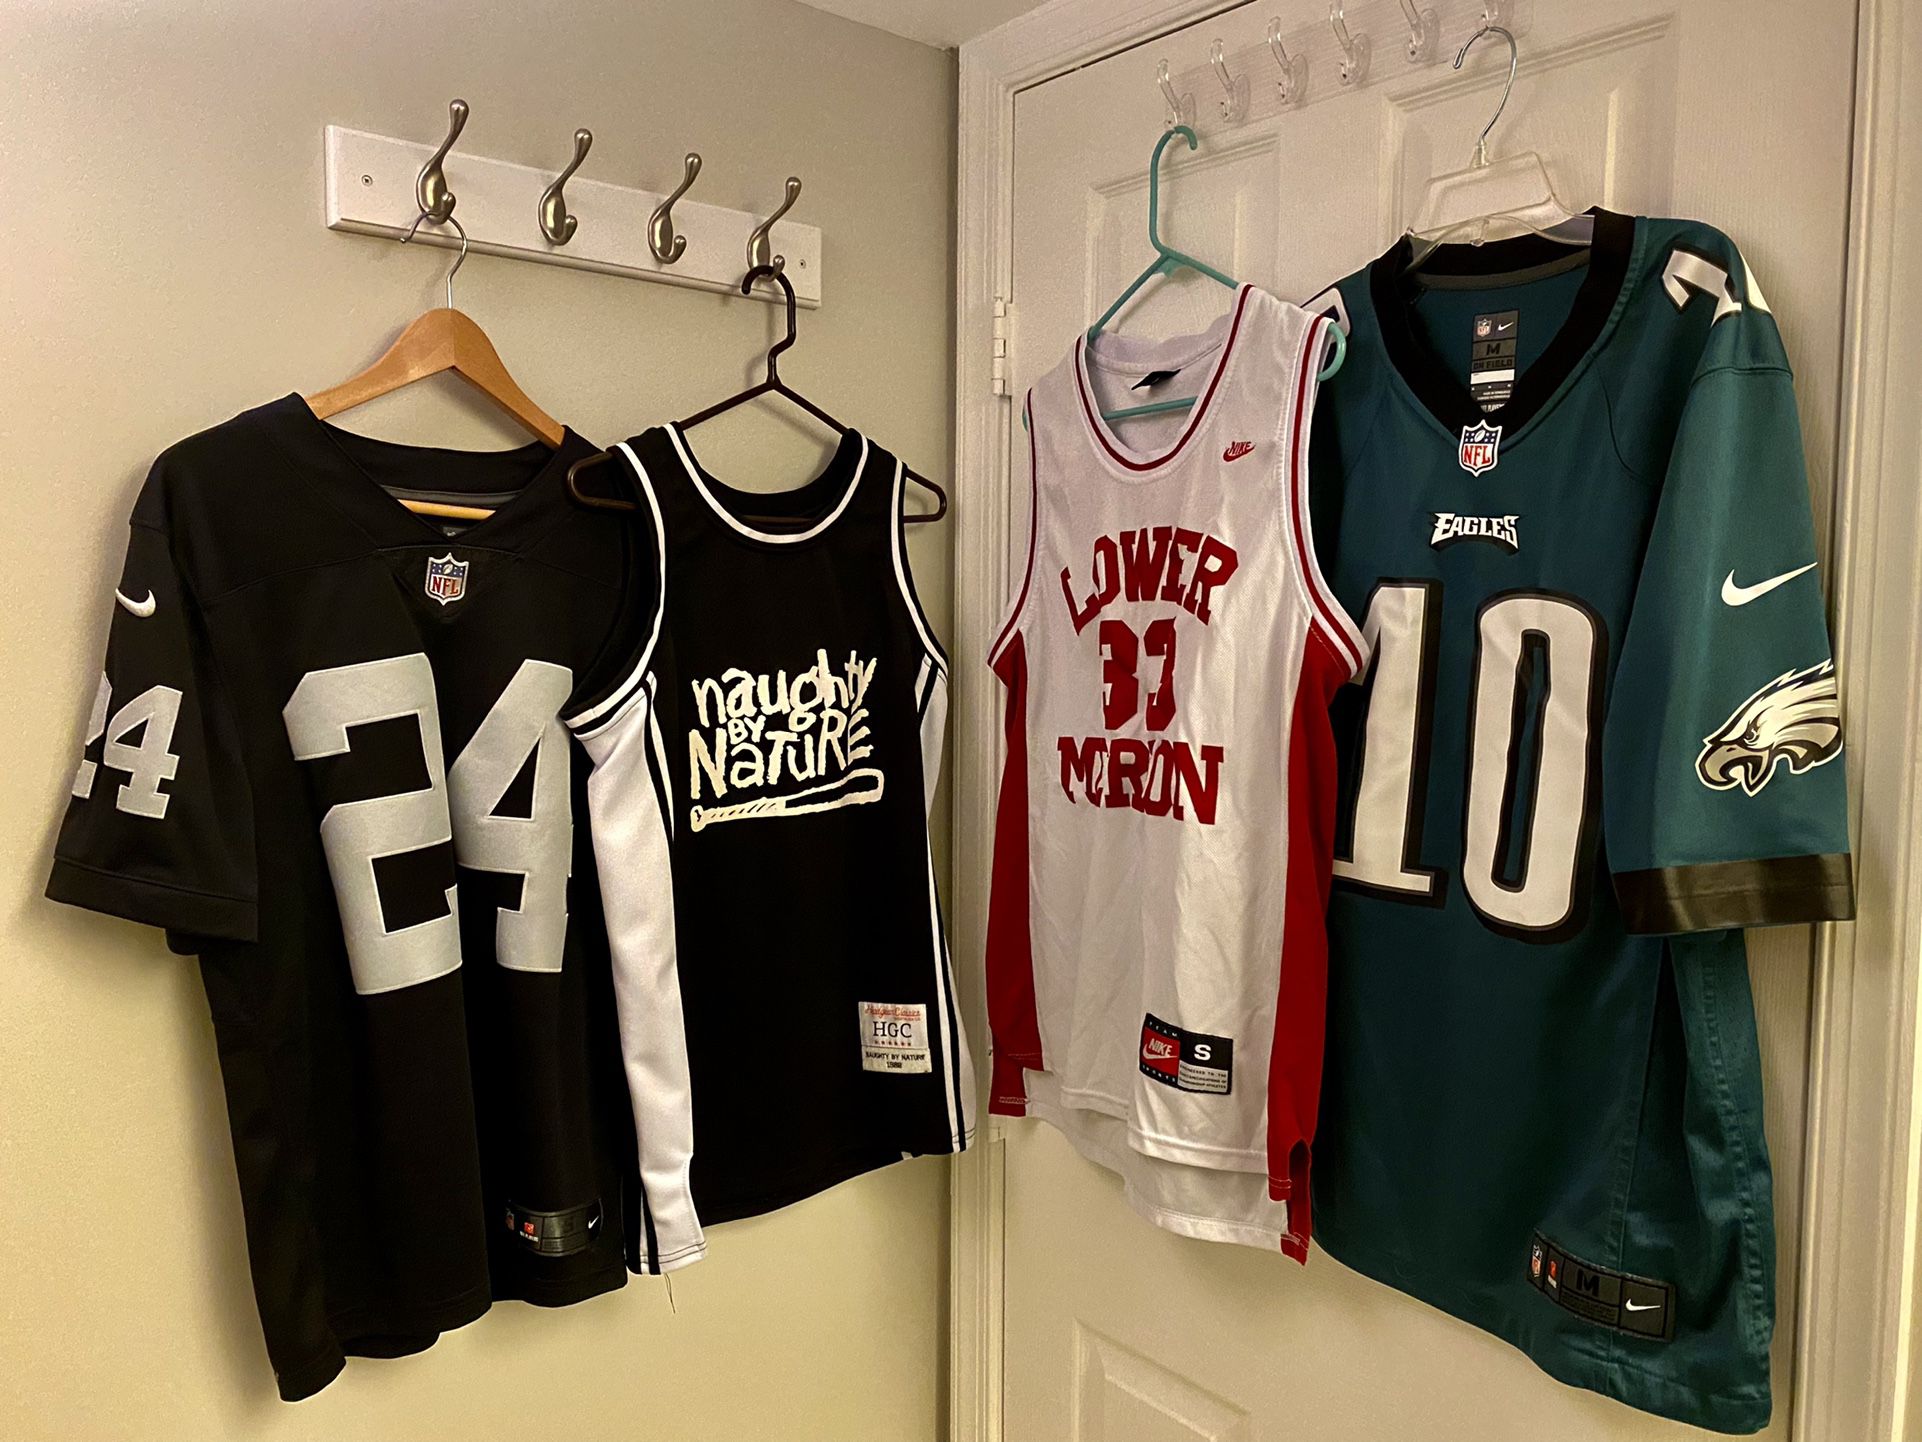 Nfl Clothing And Jersey Tanktop Size Medium